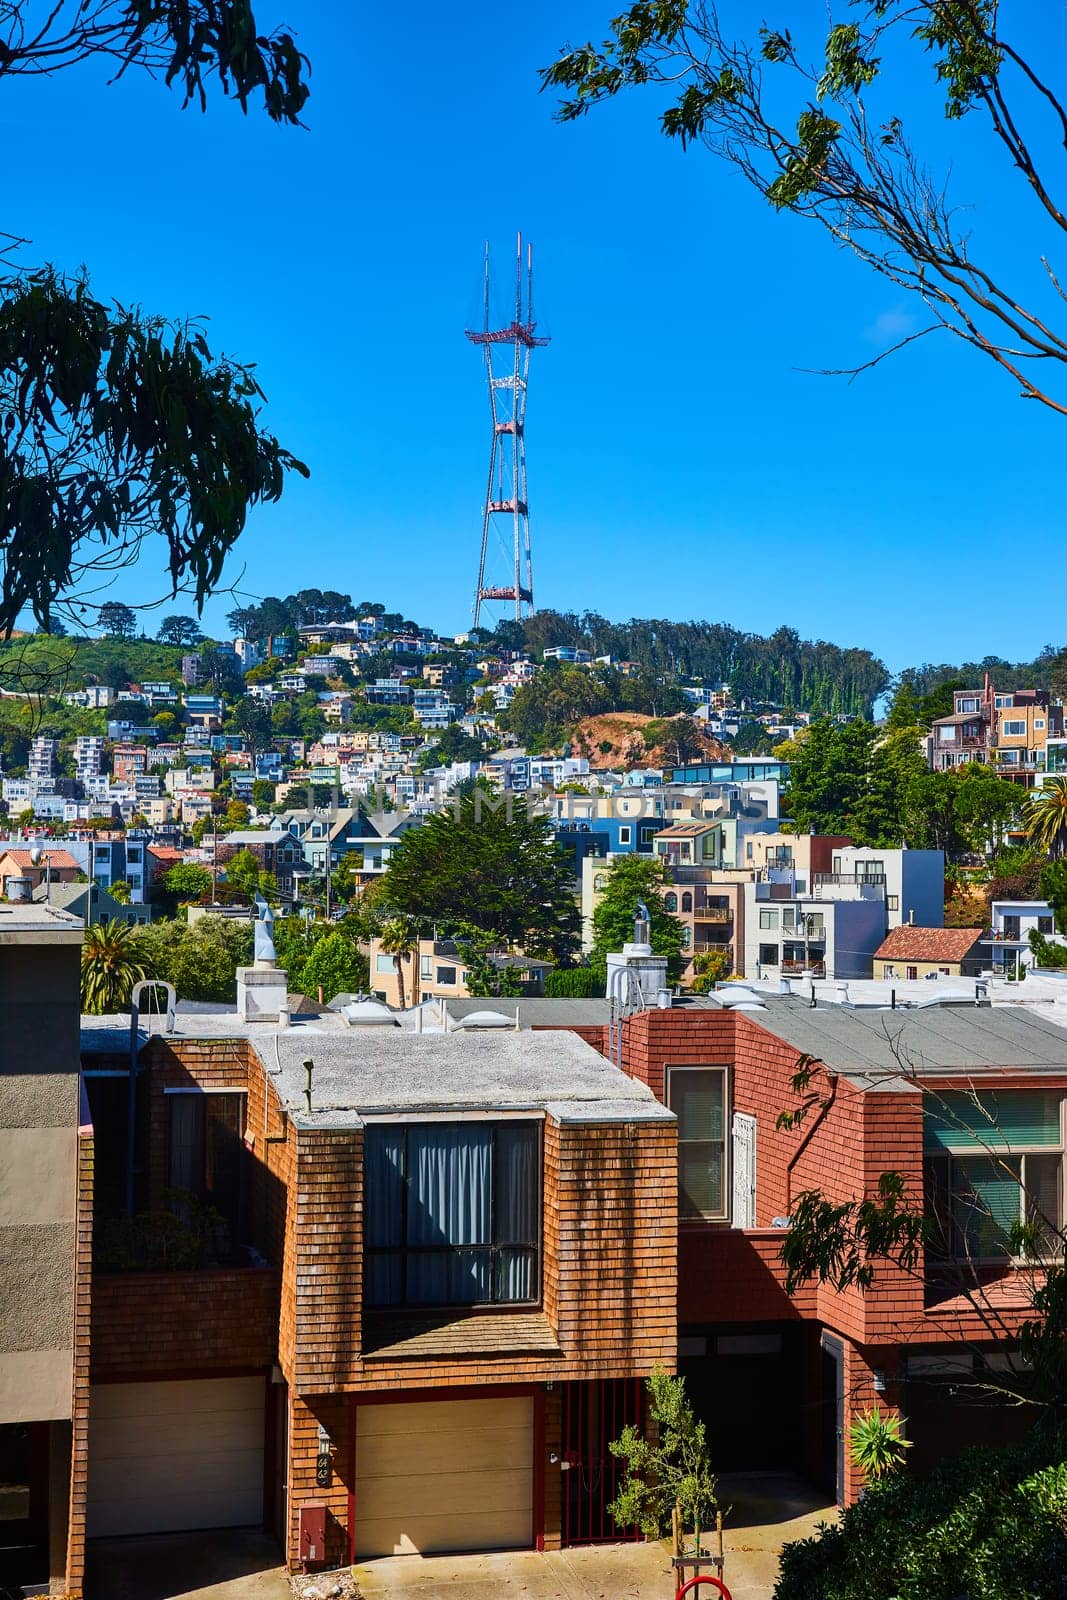 Image of Large neighborhood on hill going up to Sutro Tower on blue sky day